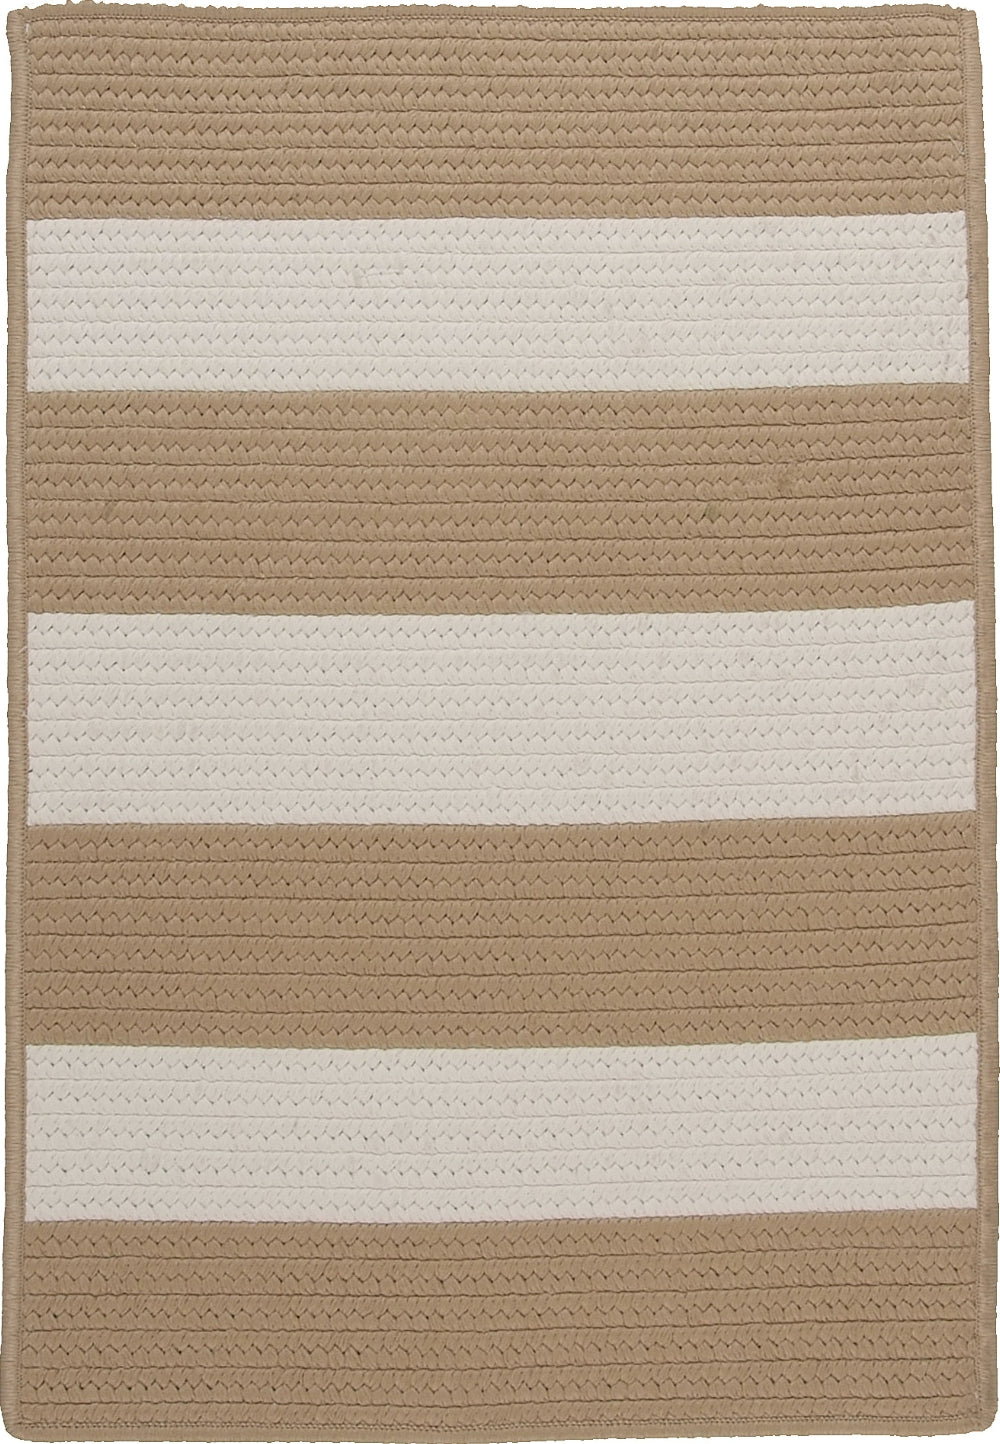 Colonial Mills Pershing PG94 Sand Area Rug